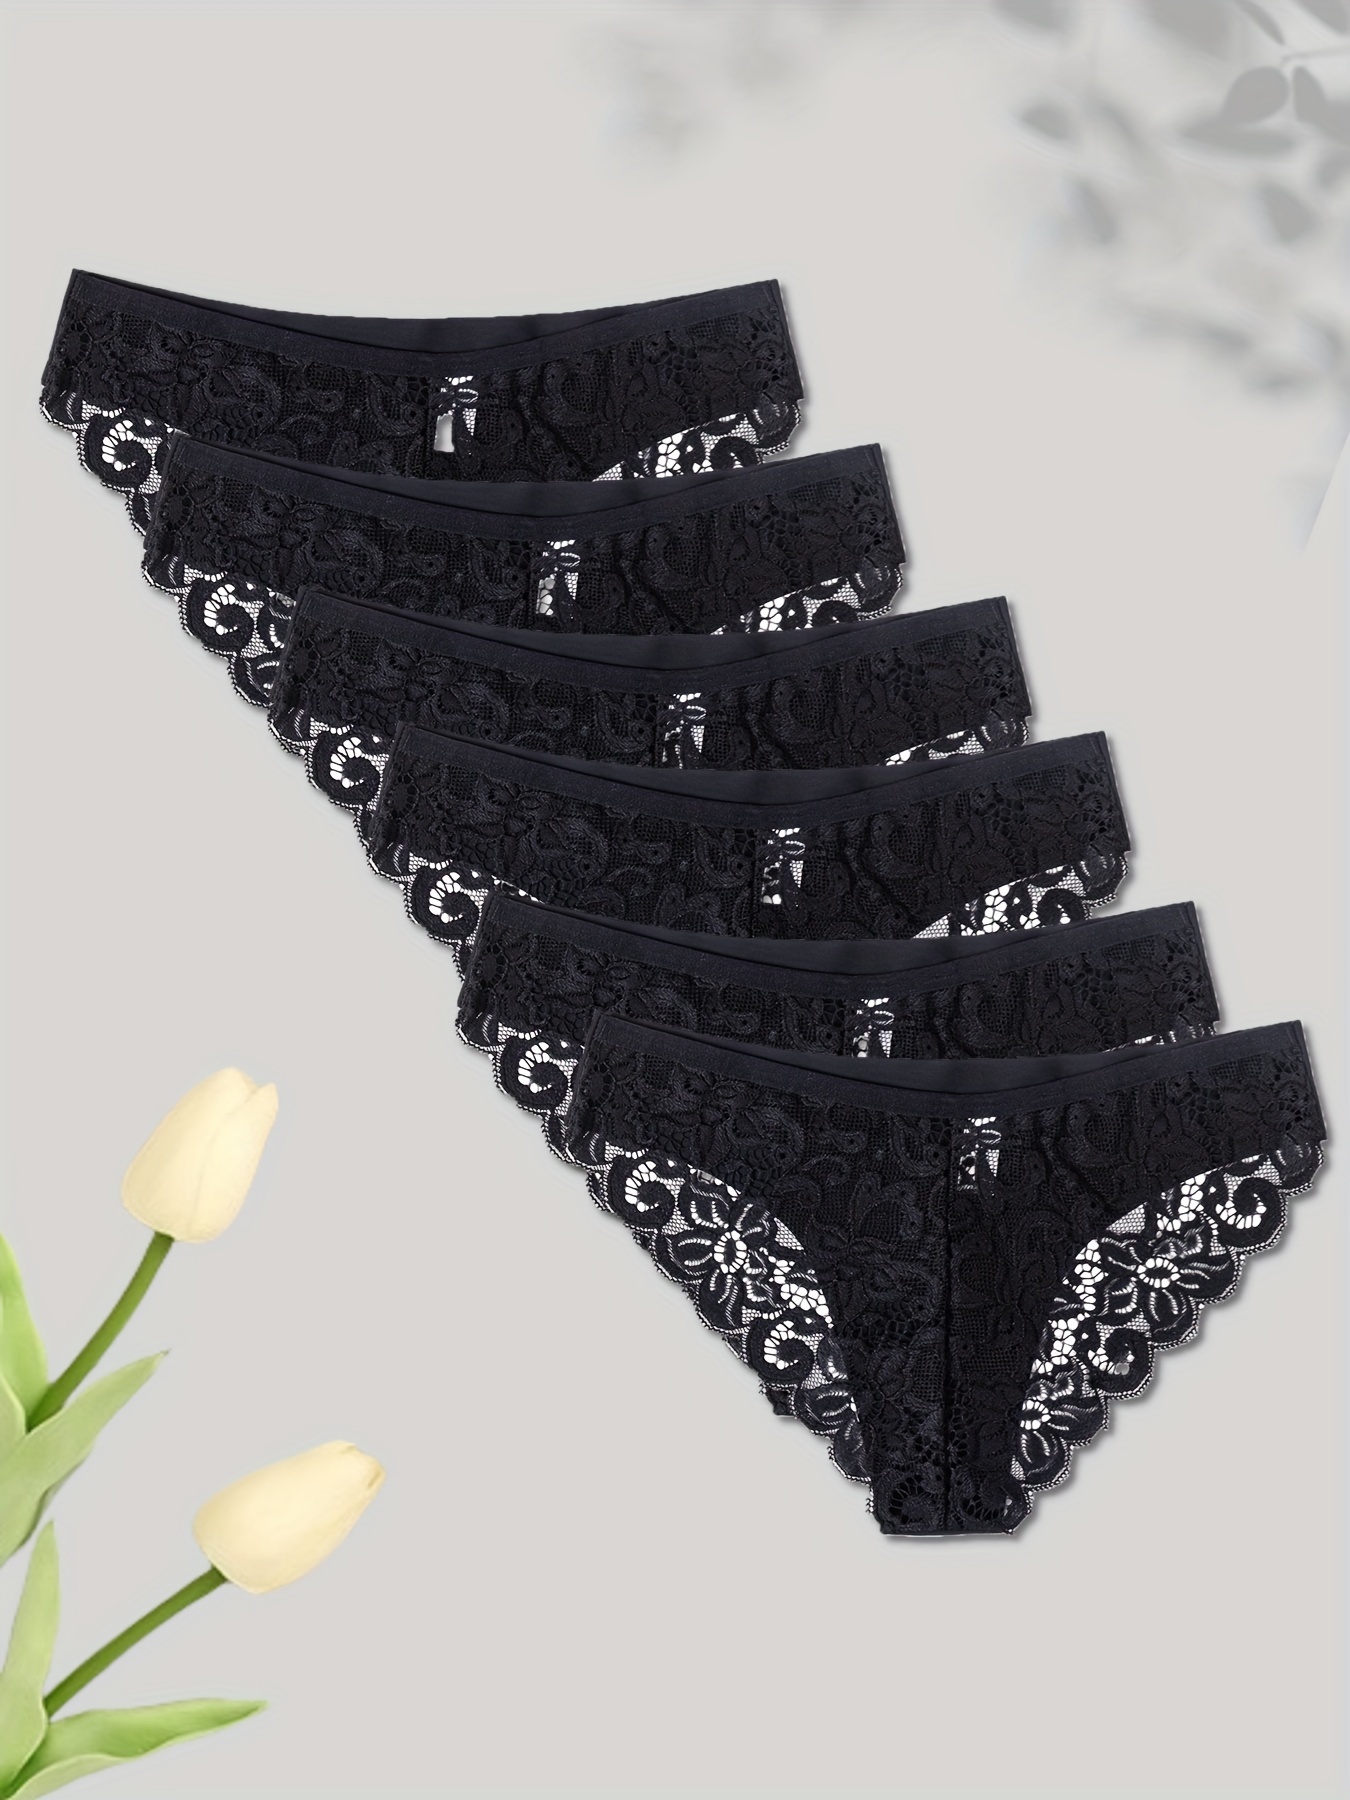 6 Pcs Lace Stitching Briefs, Sexy Breathable Low Waist Intimates Panties,  Women's Lingerie & Underwear